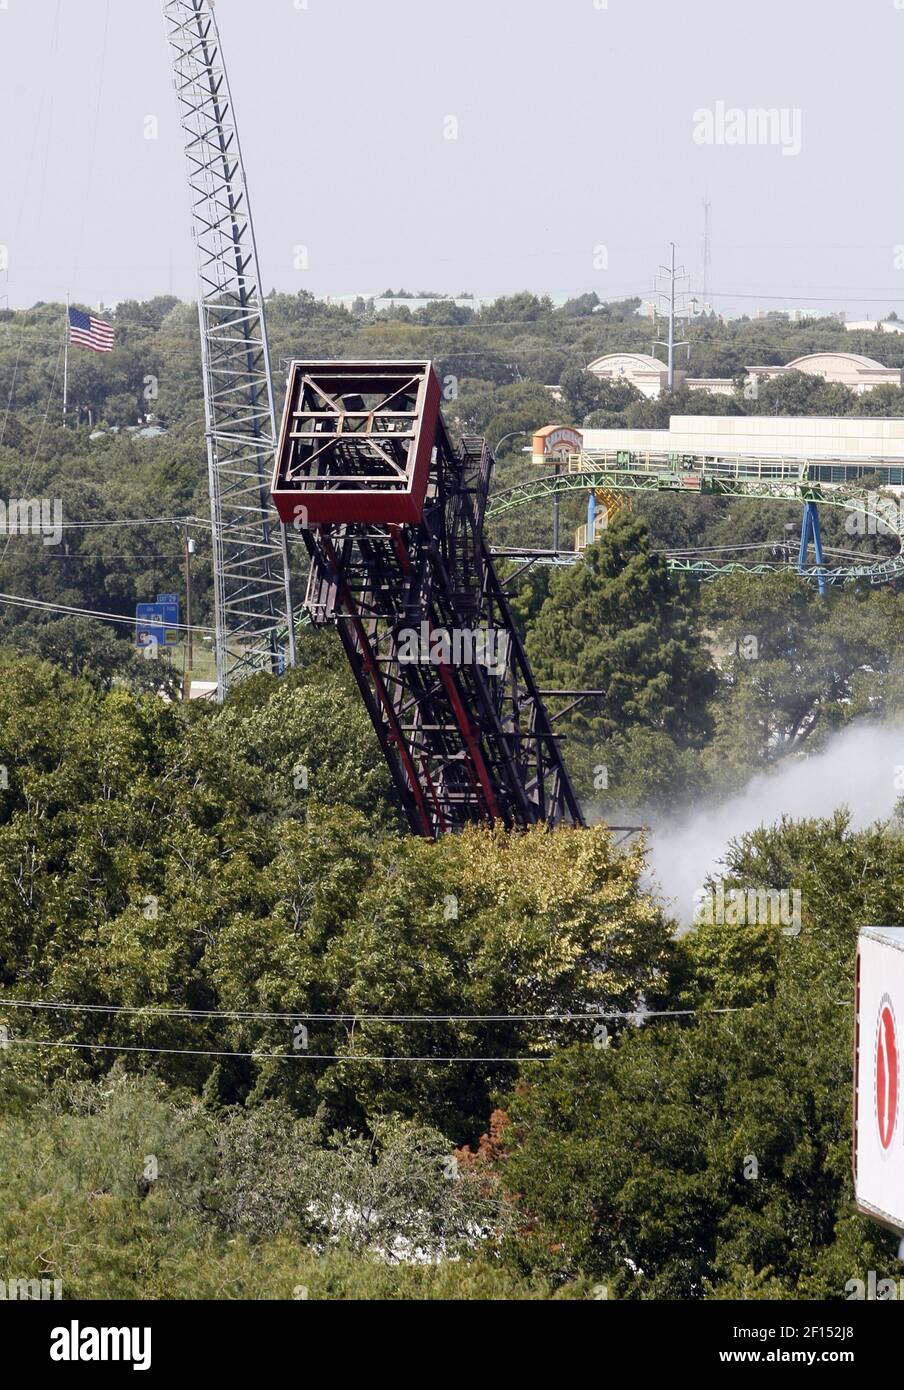 Six Flags over Texas imploded the old Wildcatter ride in Arlington, Texas, Tuesday, October 2, 2007. The ride came down to make room for a new ride. (Photo by Brian Lawdermilk/Fort Worth Star-Telegram/MCT/Sipa USA) Stock Photo